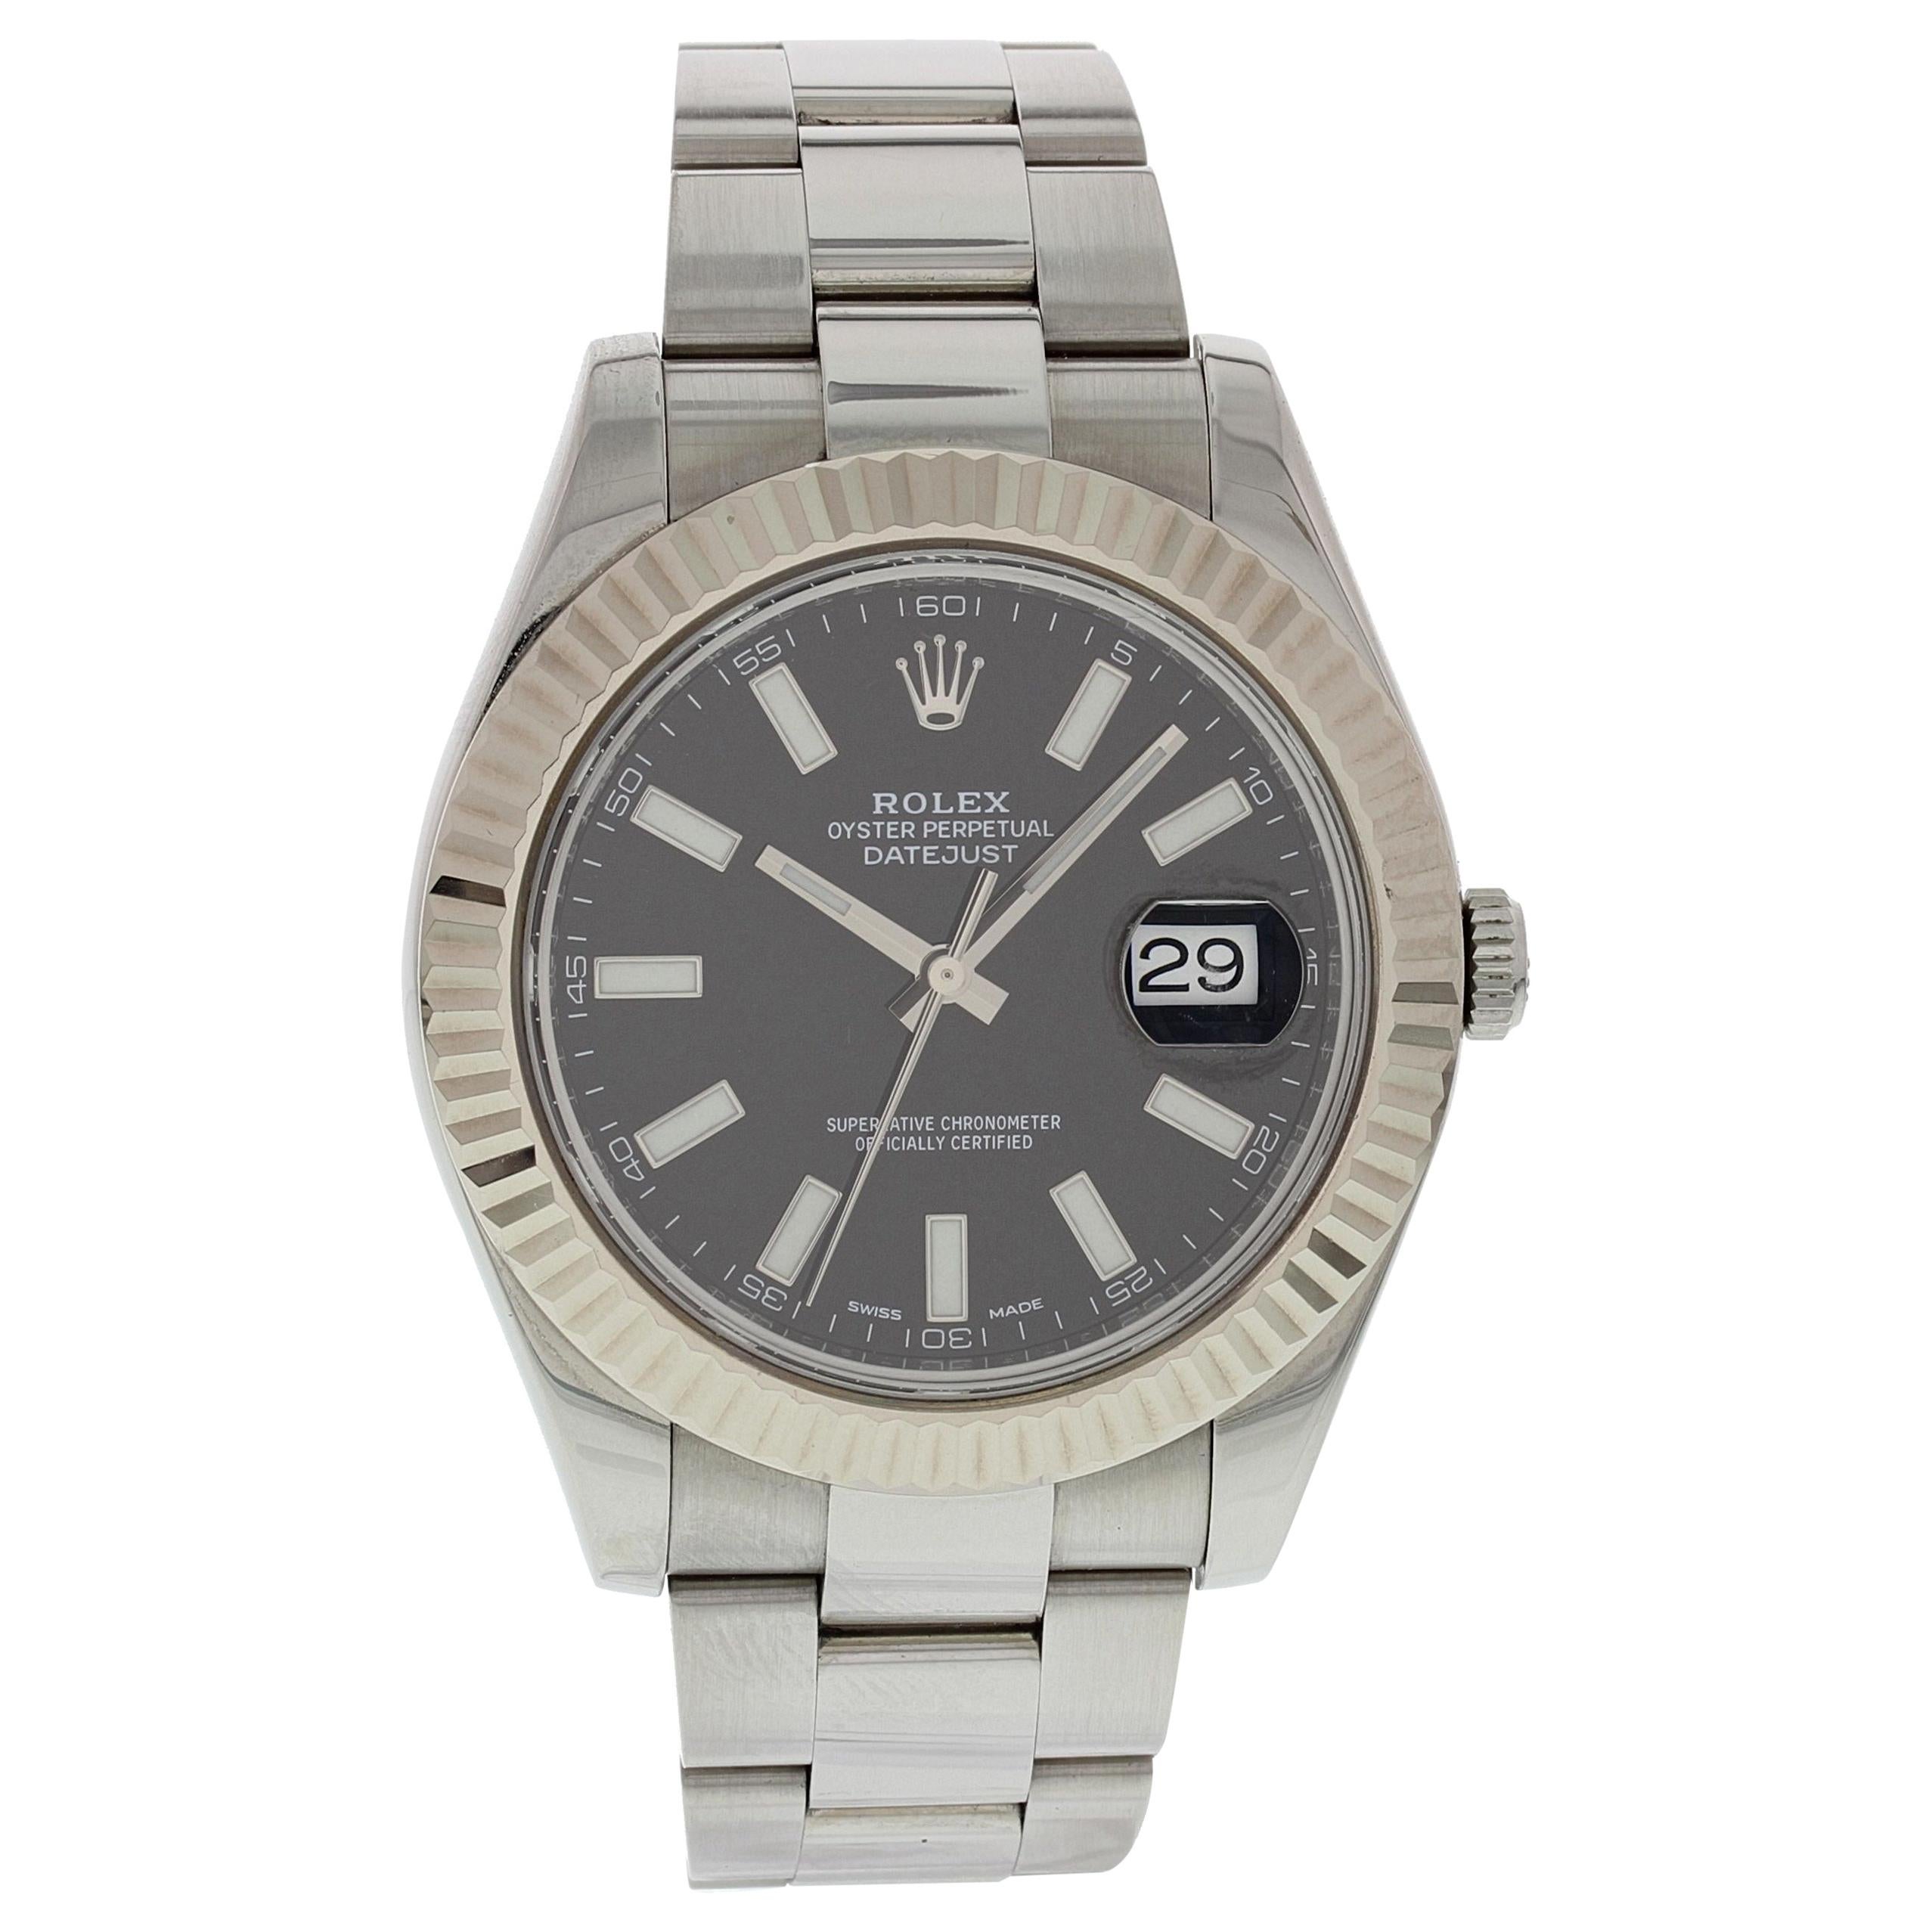 Rolex Oyster Perpetual Datejust II 116334 Black Dial For Sale